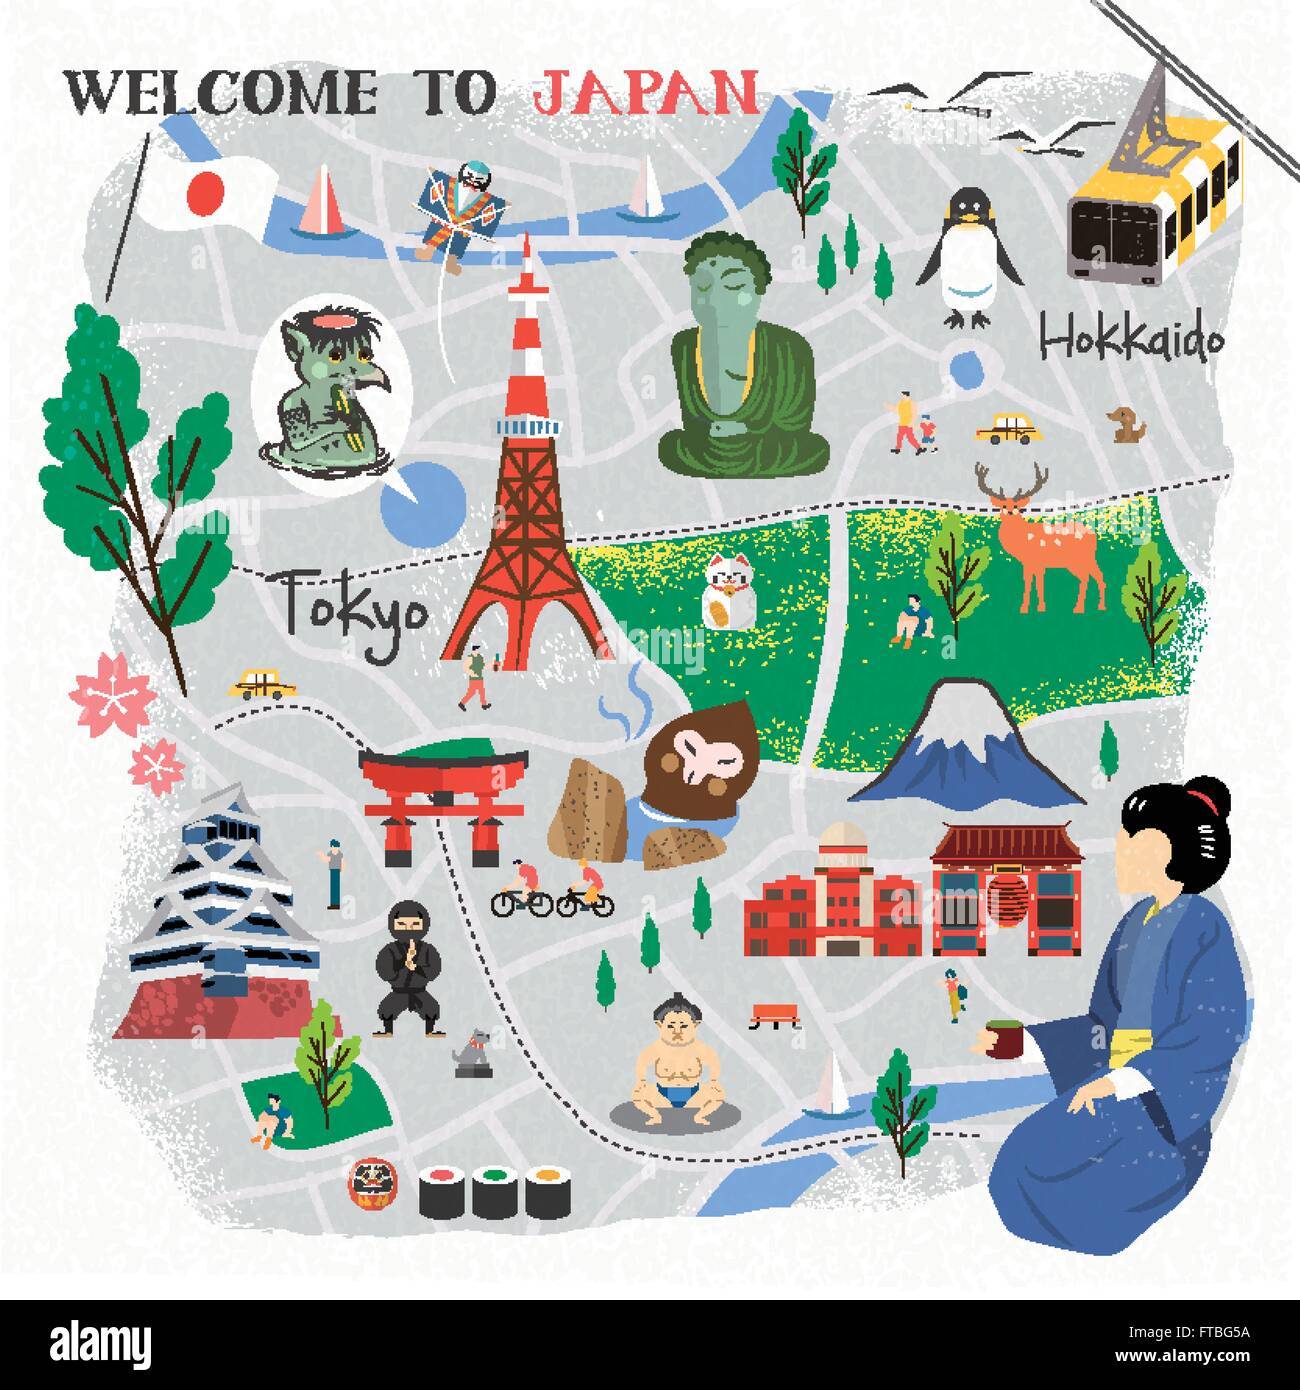 Japan walking map with famous attractions and symbols Stock Vector